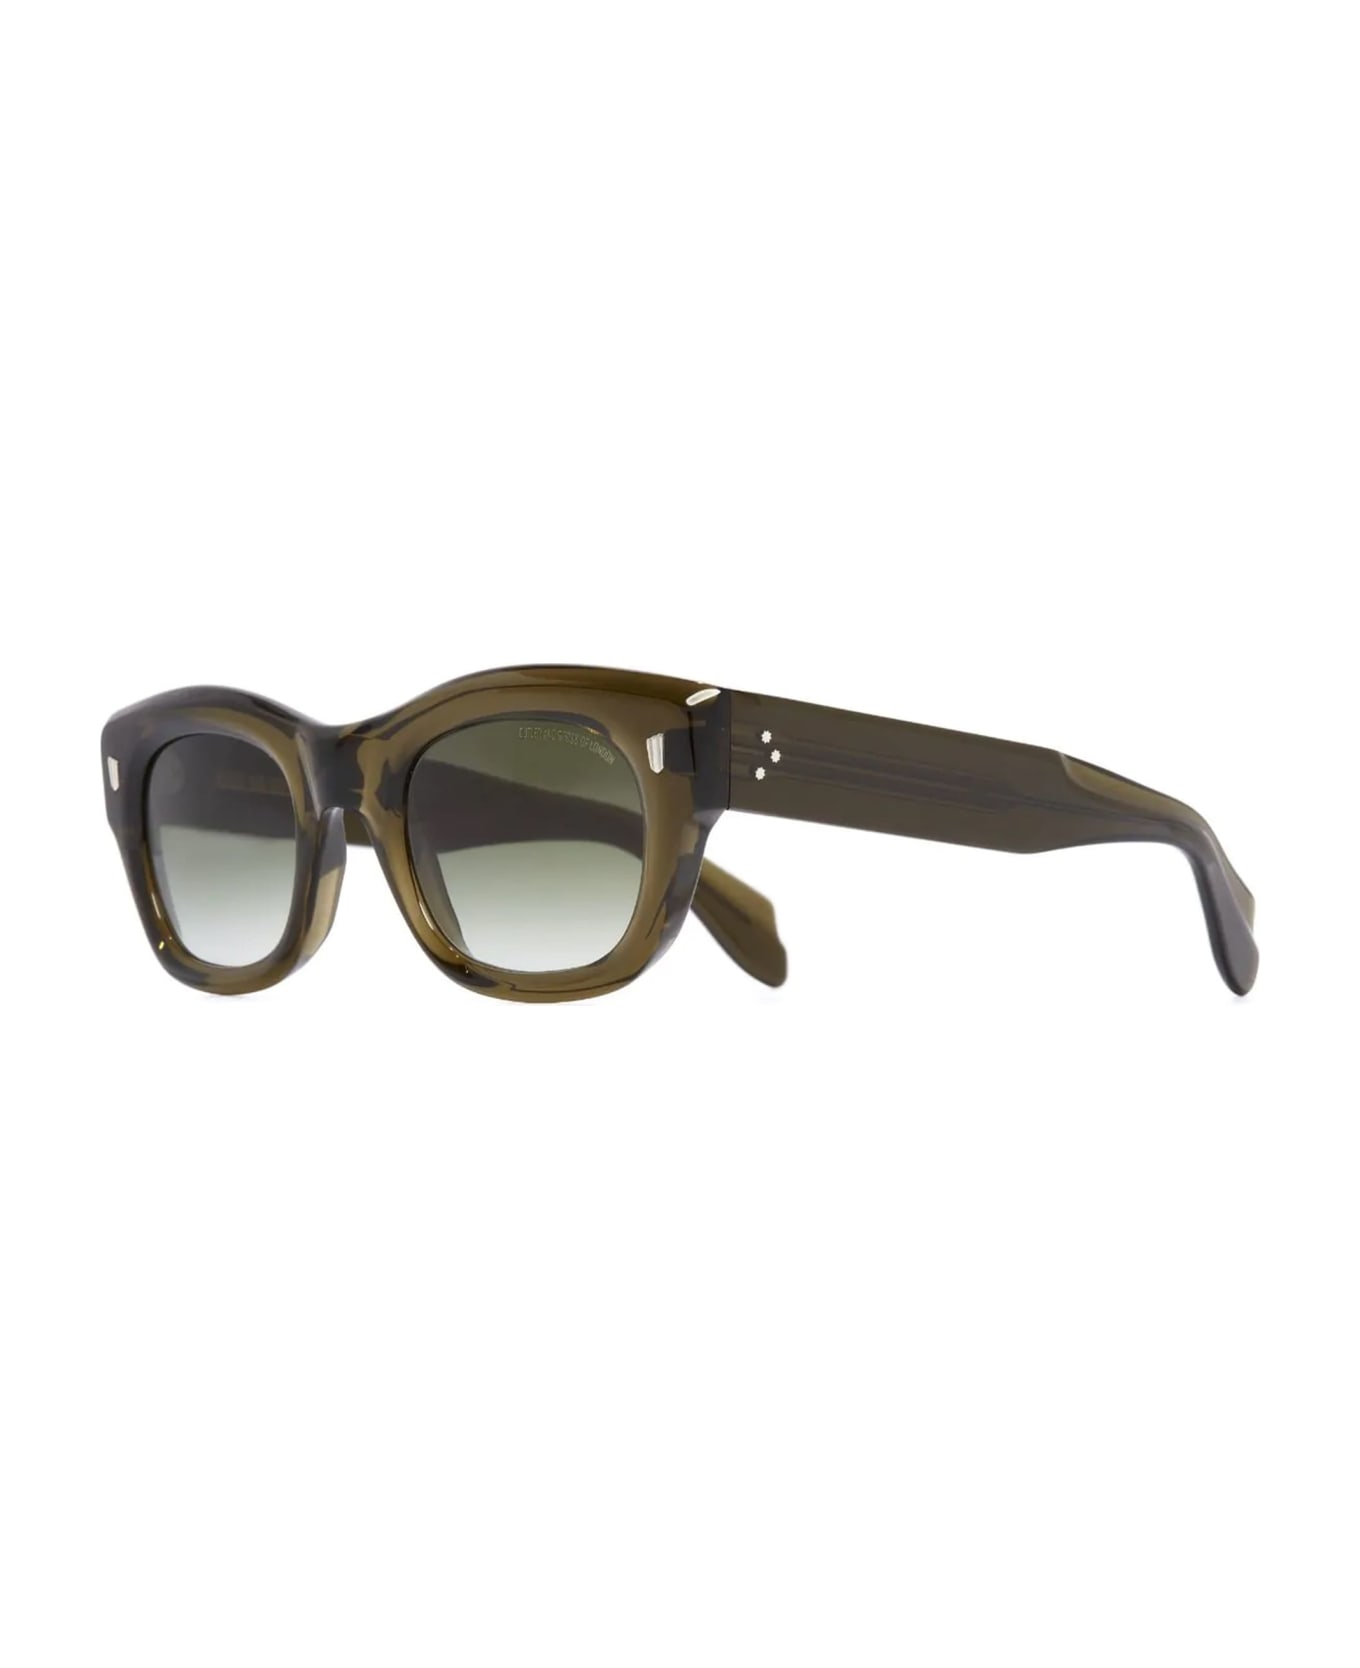 Cutler and Gross 9261 / Olive Sunglasses - Olive